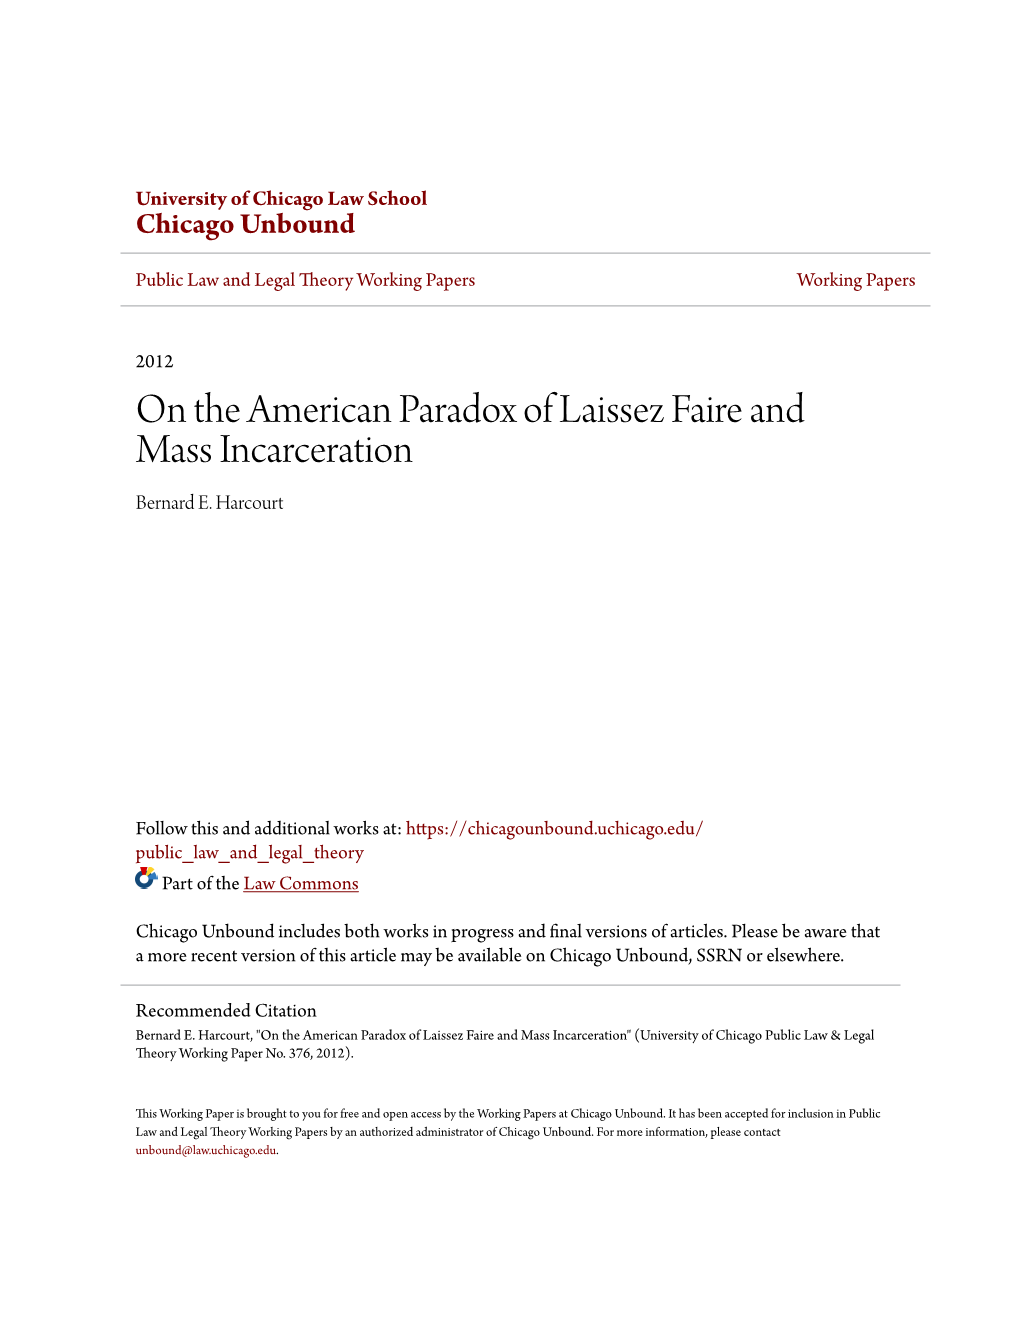 On the American Paradox of Laissez Faire and Mass Incarceration Bernard E